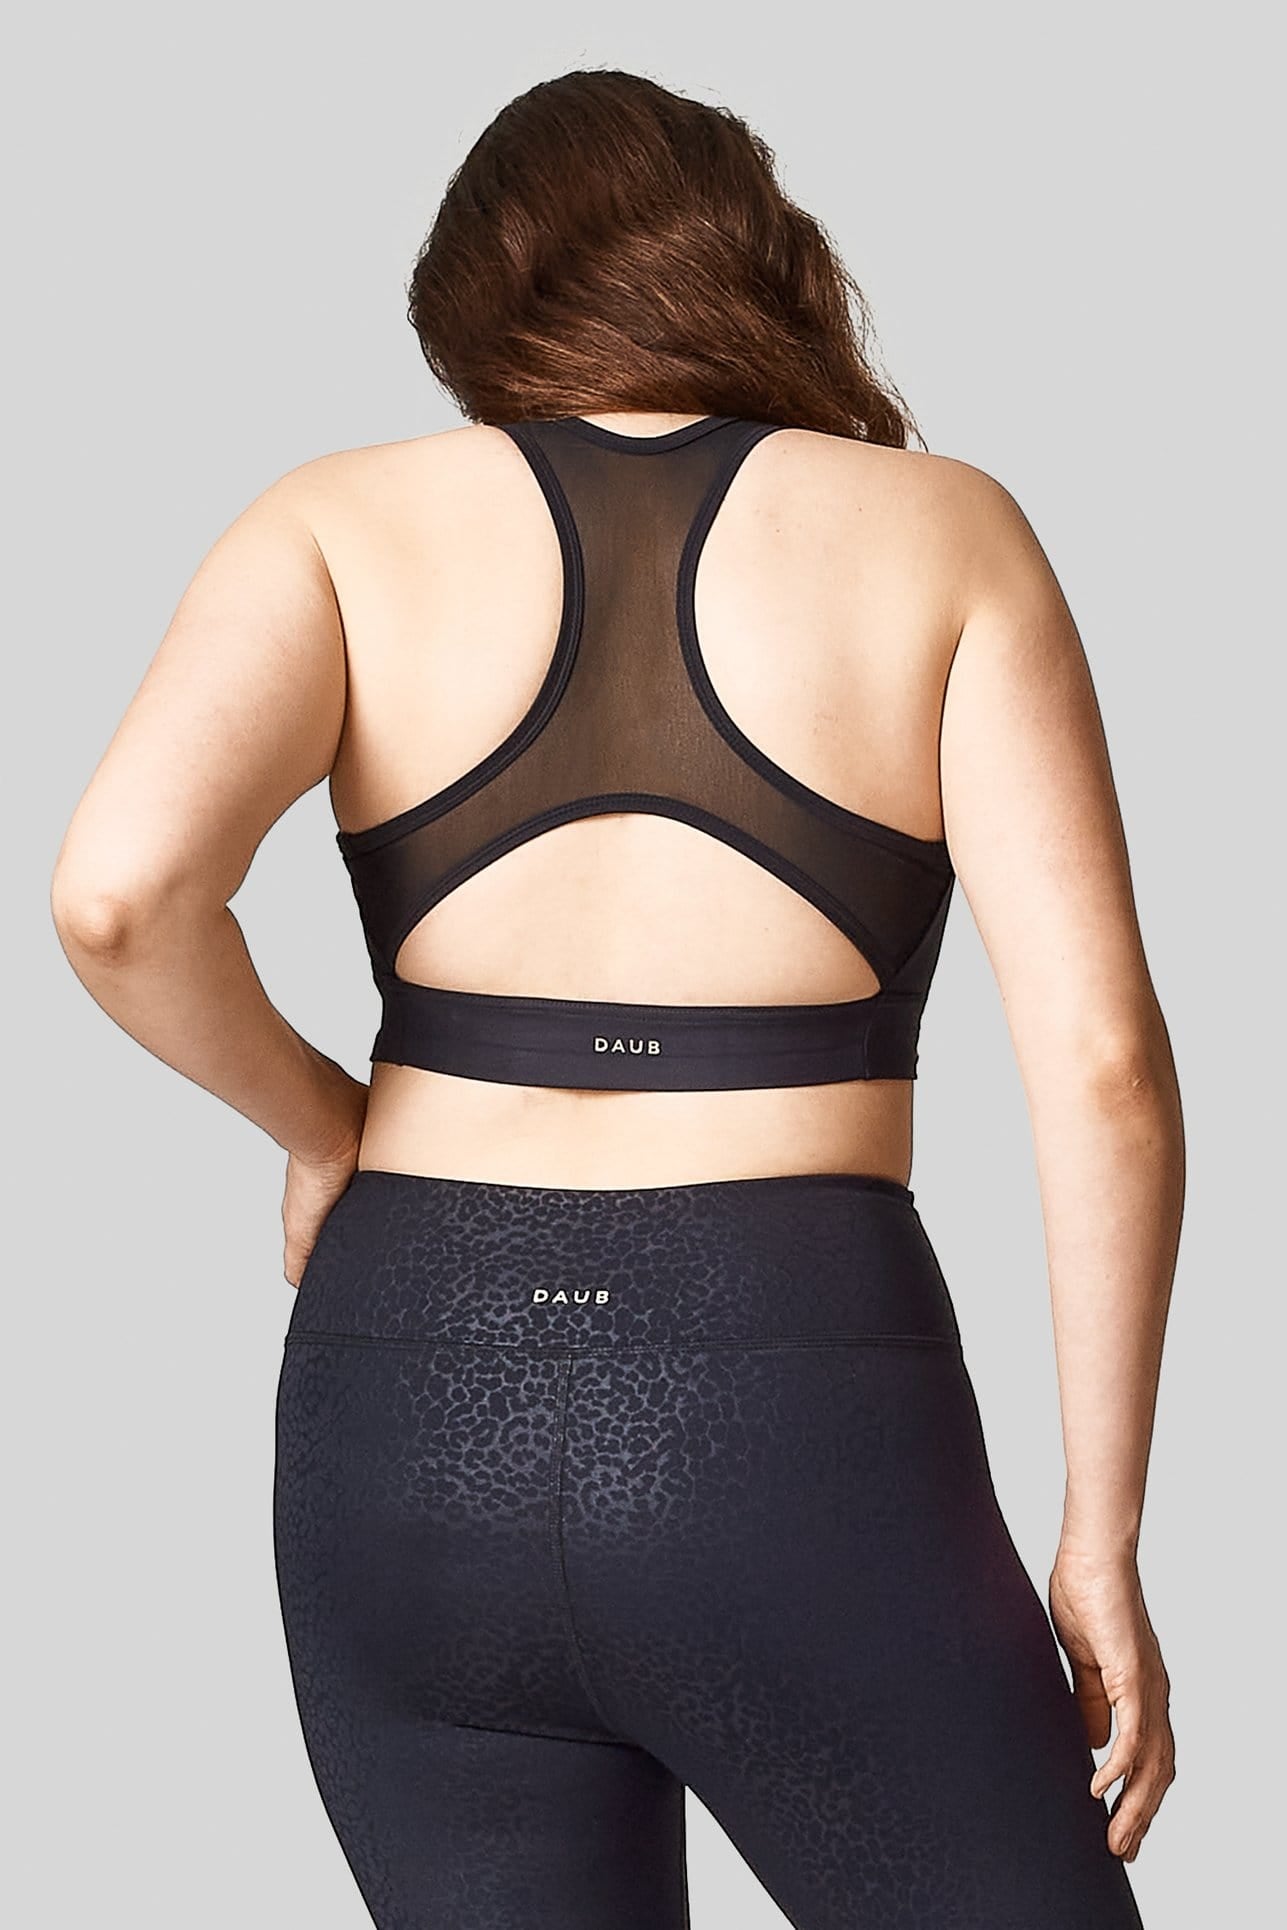 Back view of a woman wearing a plain black sports bra with mesh racerback. Paired with cheetah print leggings.